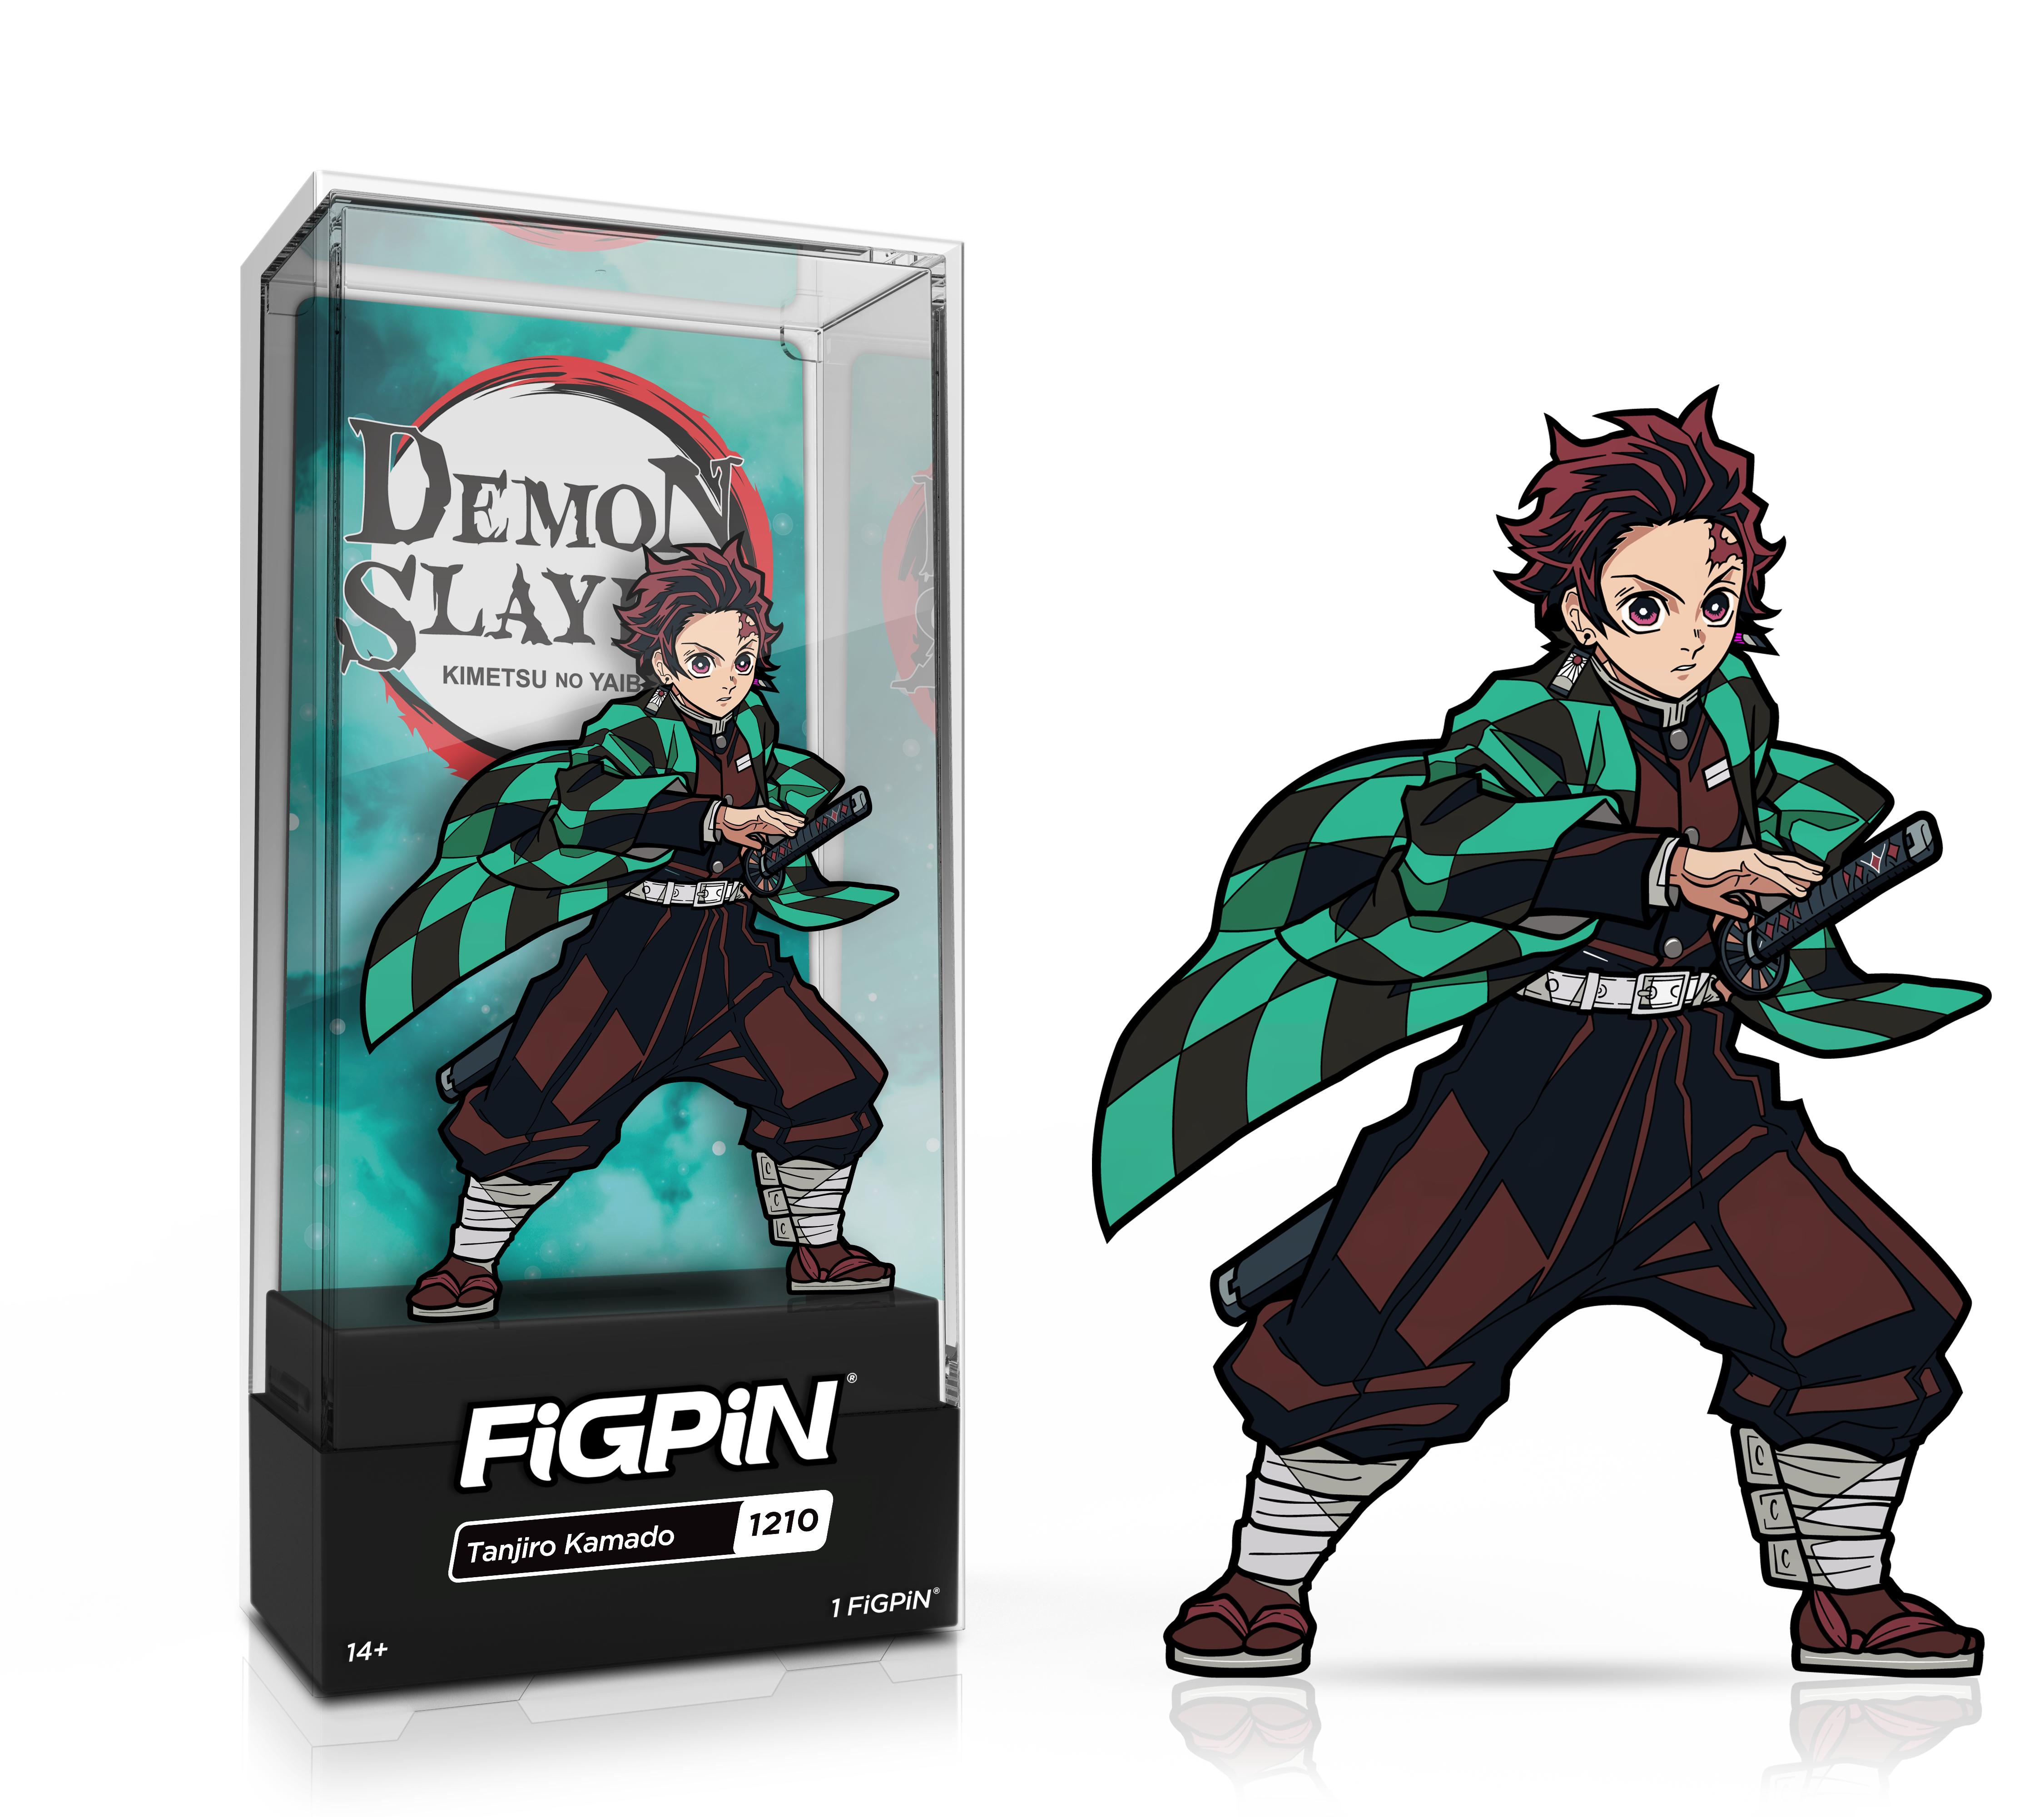 Side by side view of the Tanjiro Kamado enamel pin in display case and the art render.